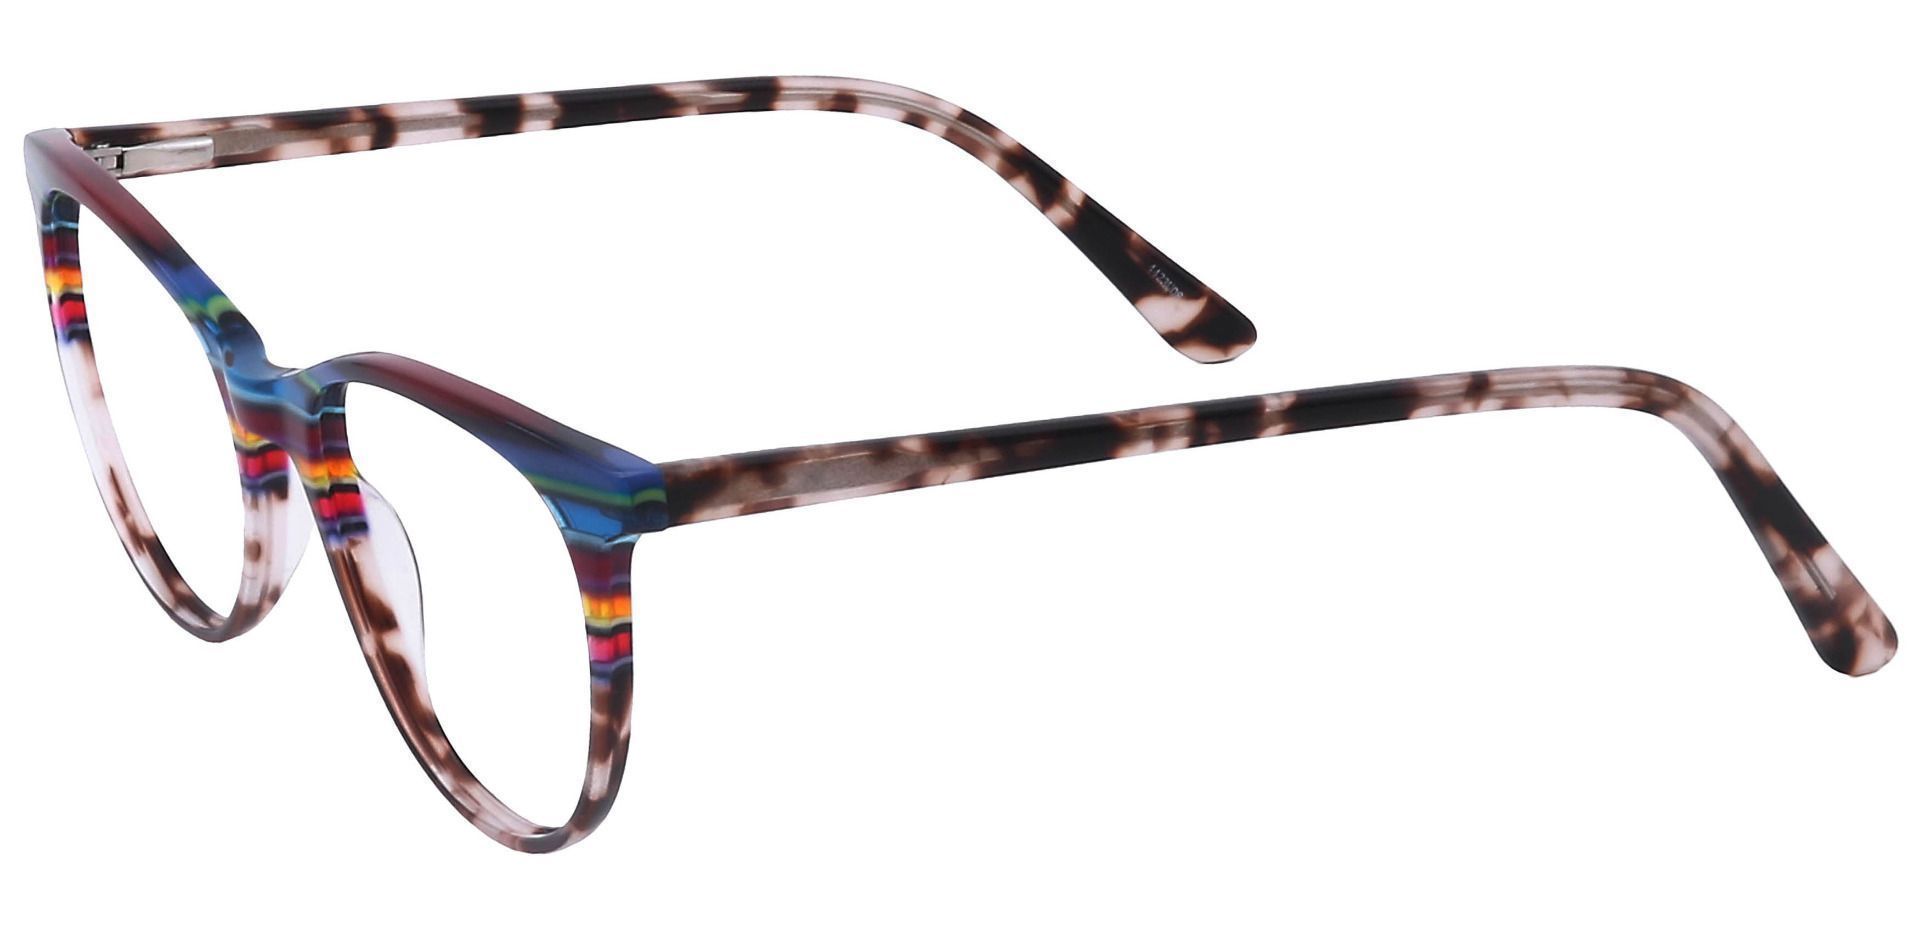 Patagonia Oval Reading Glasses - Multi Colored Stripes